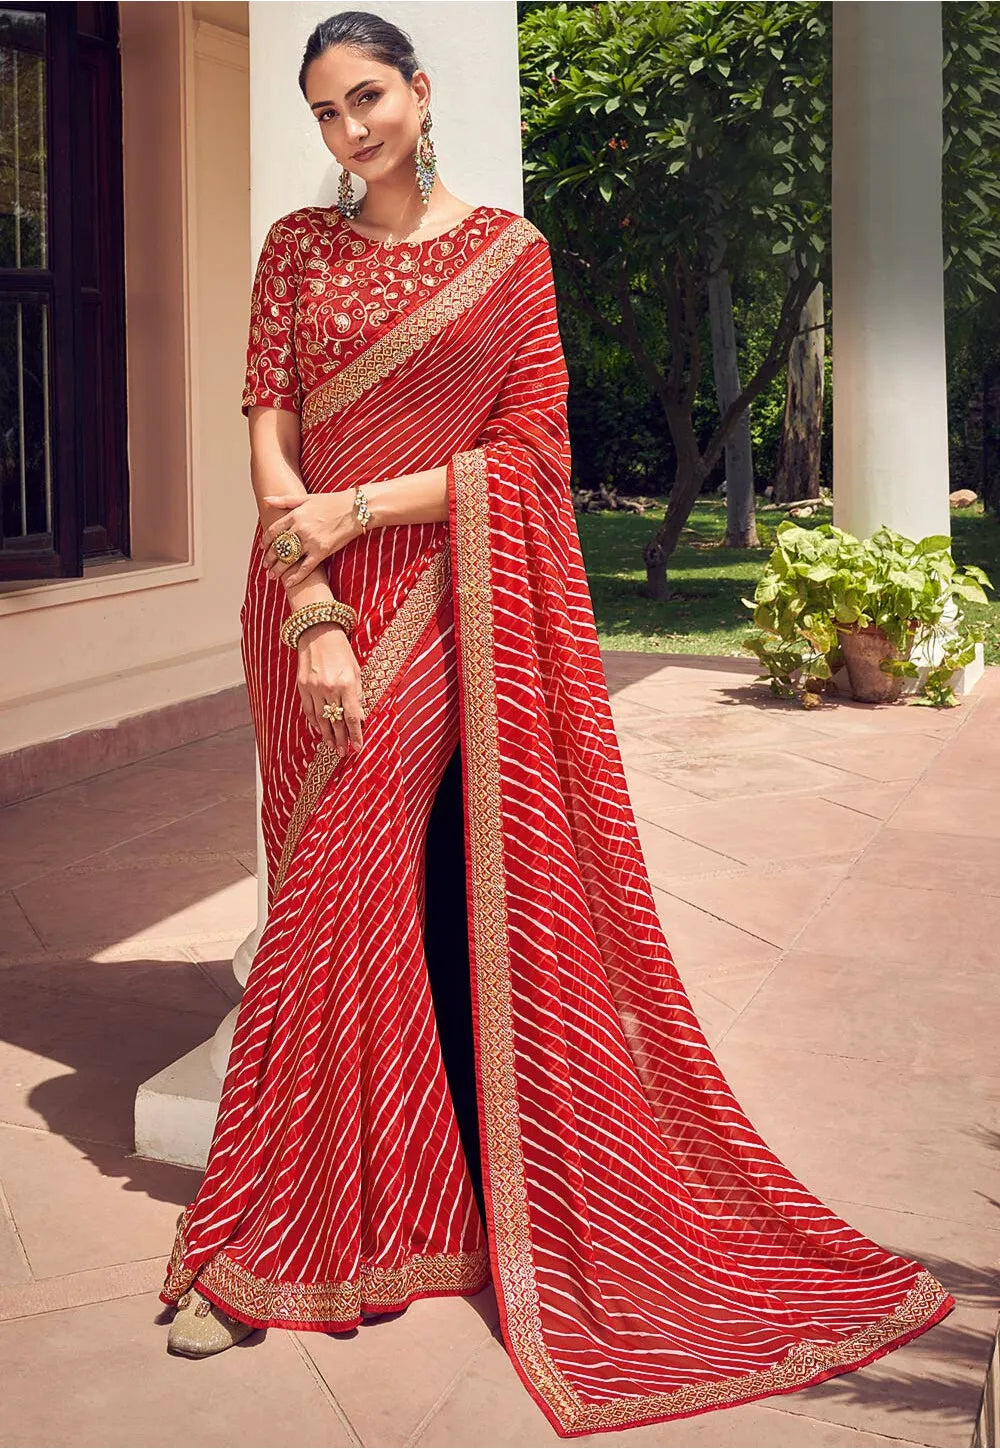 RED Georgette Saree WITH Embroidery Border